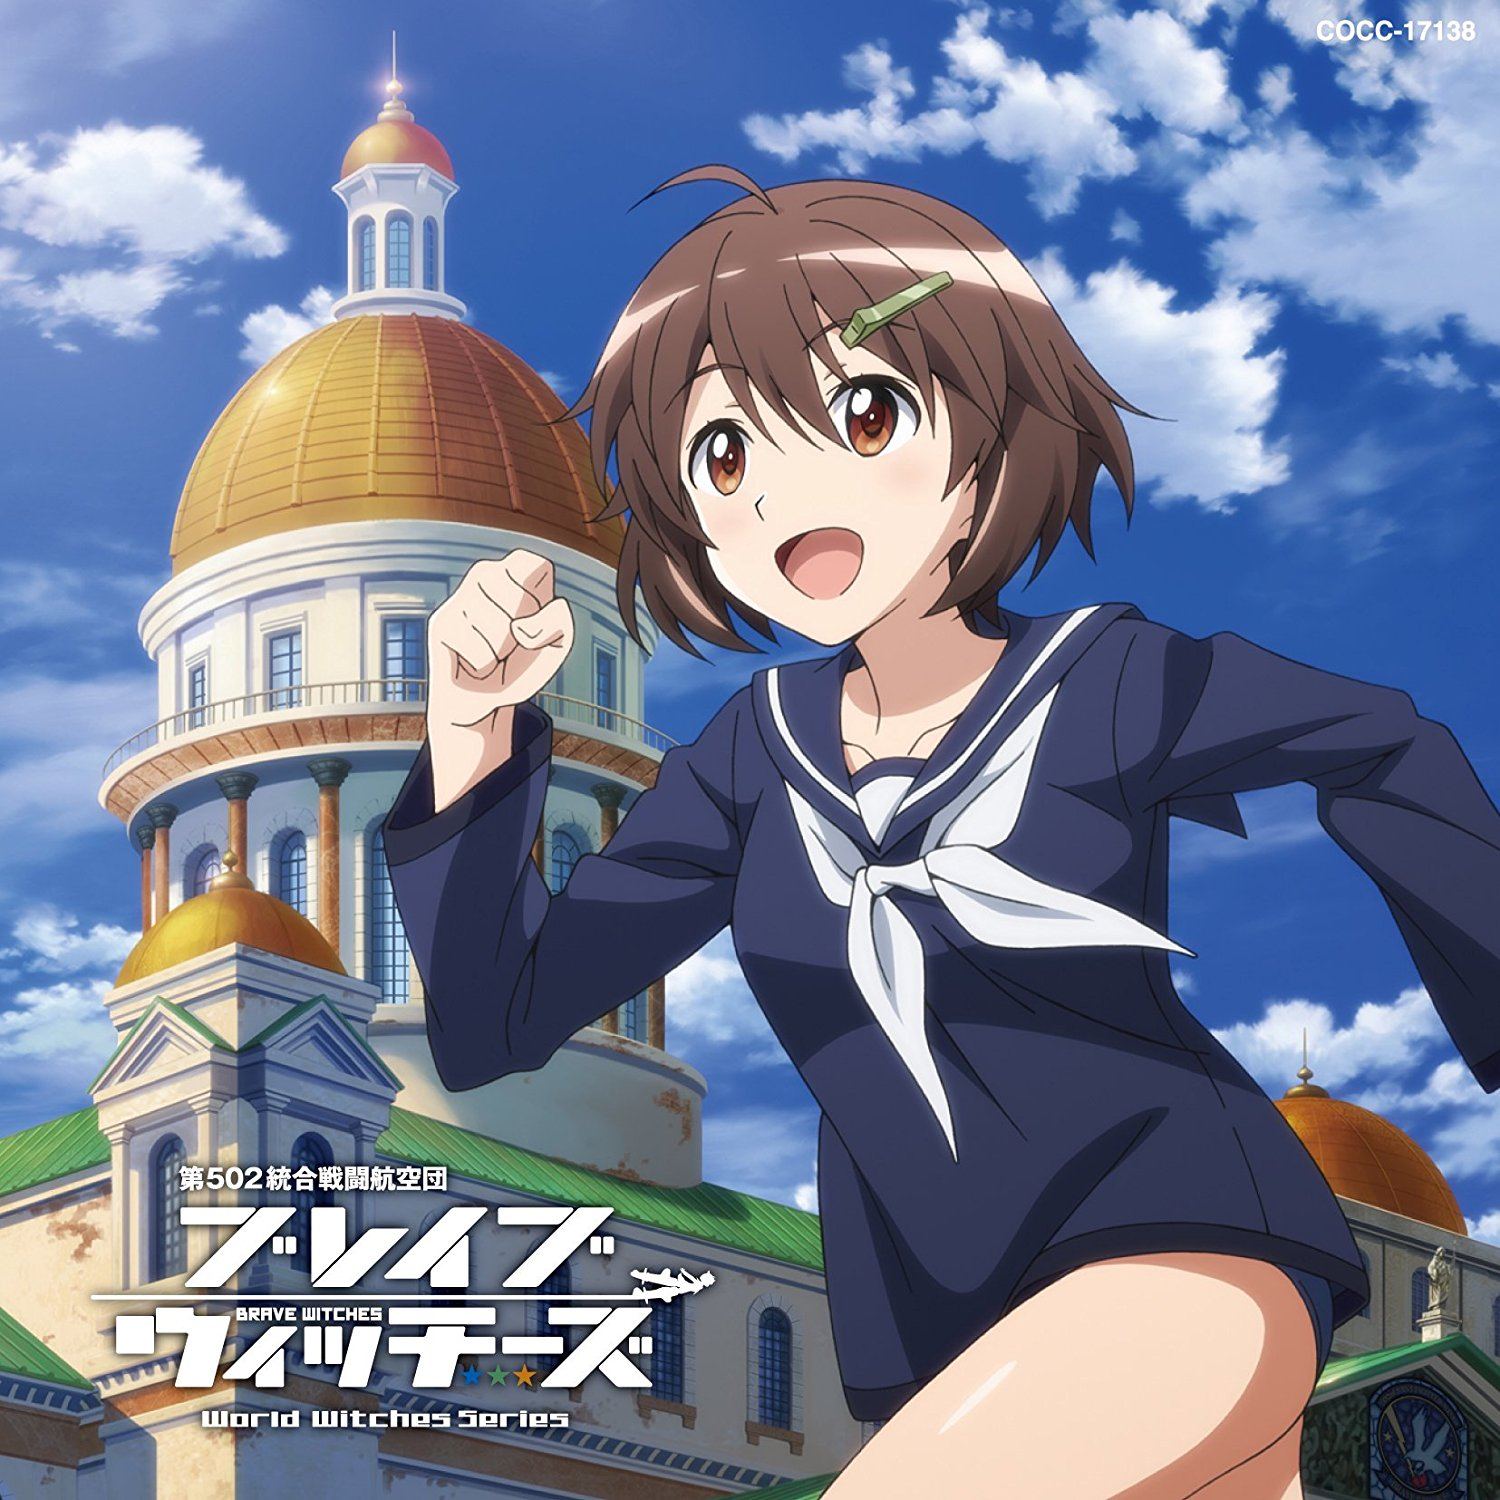 Strike Witches/Brave Witches - picture and Discussion Thread |  alternate-timelines.com